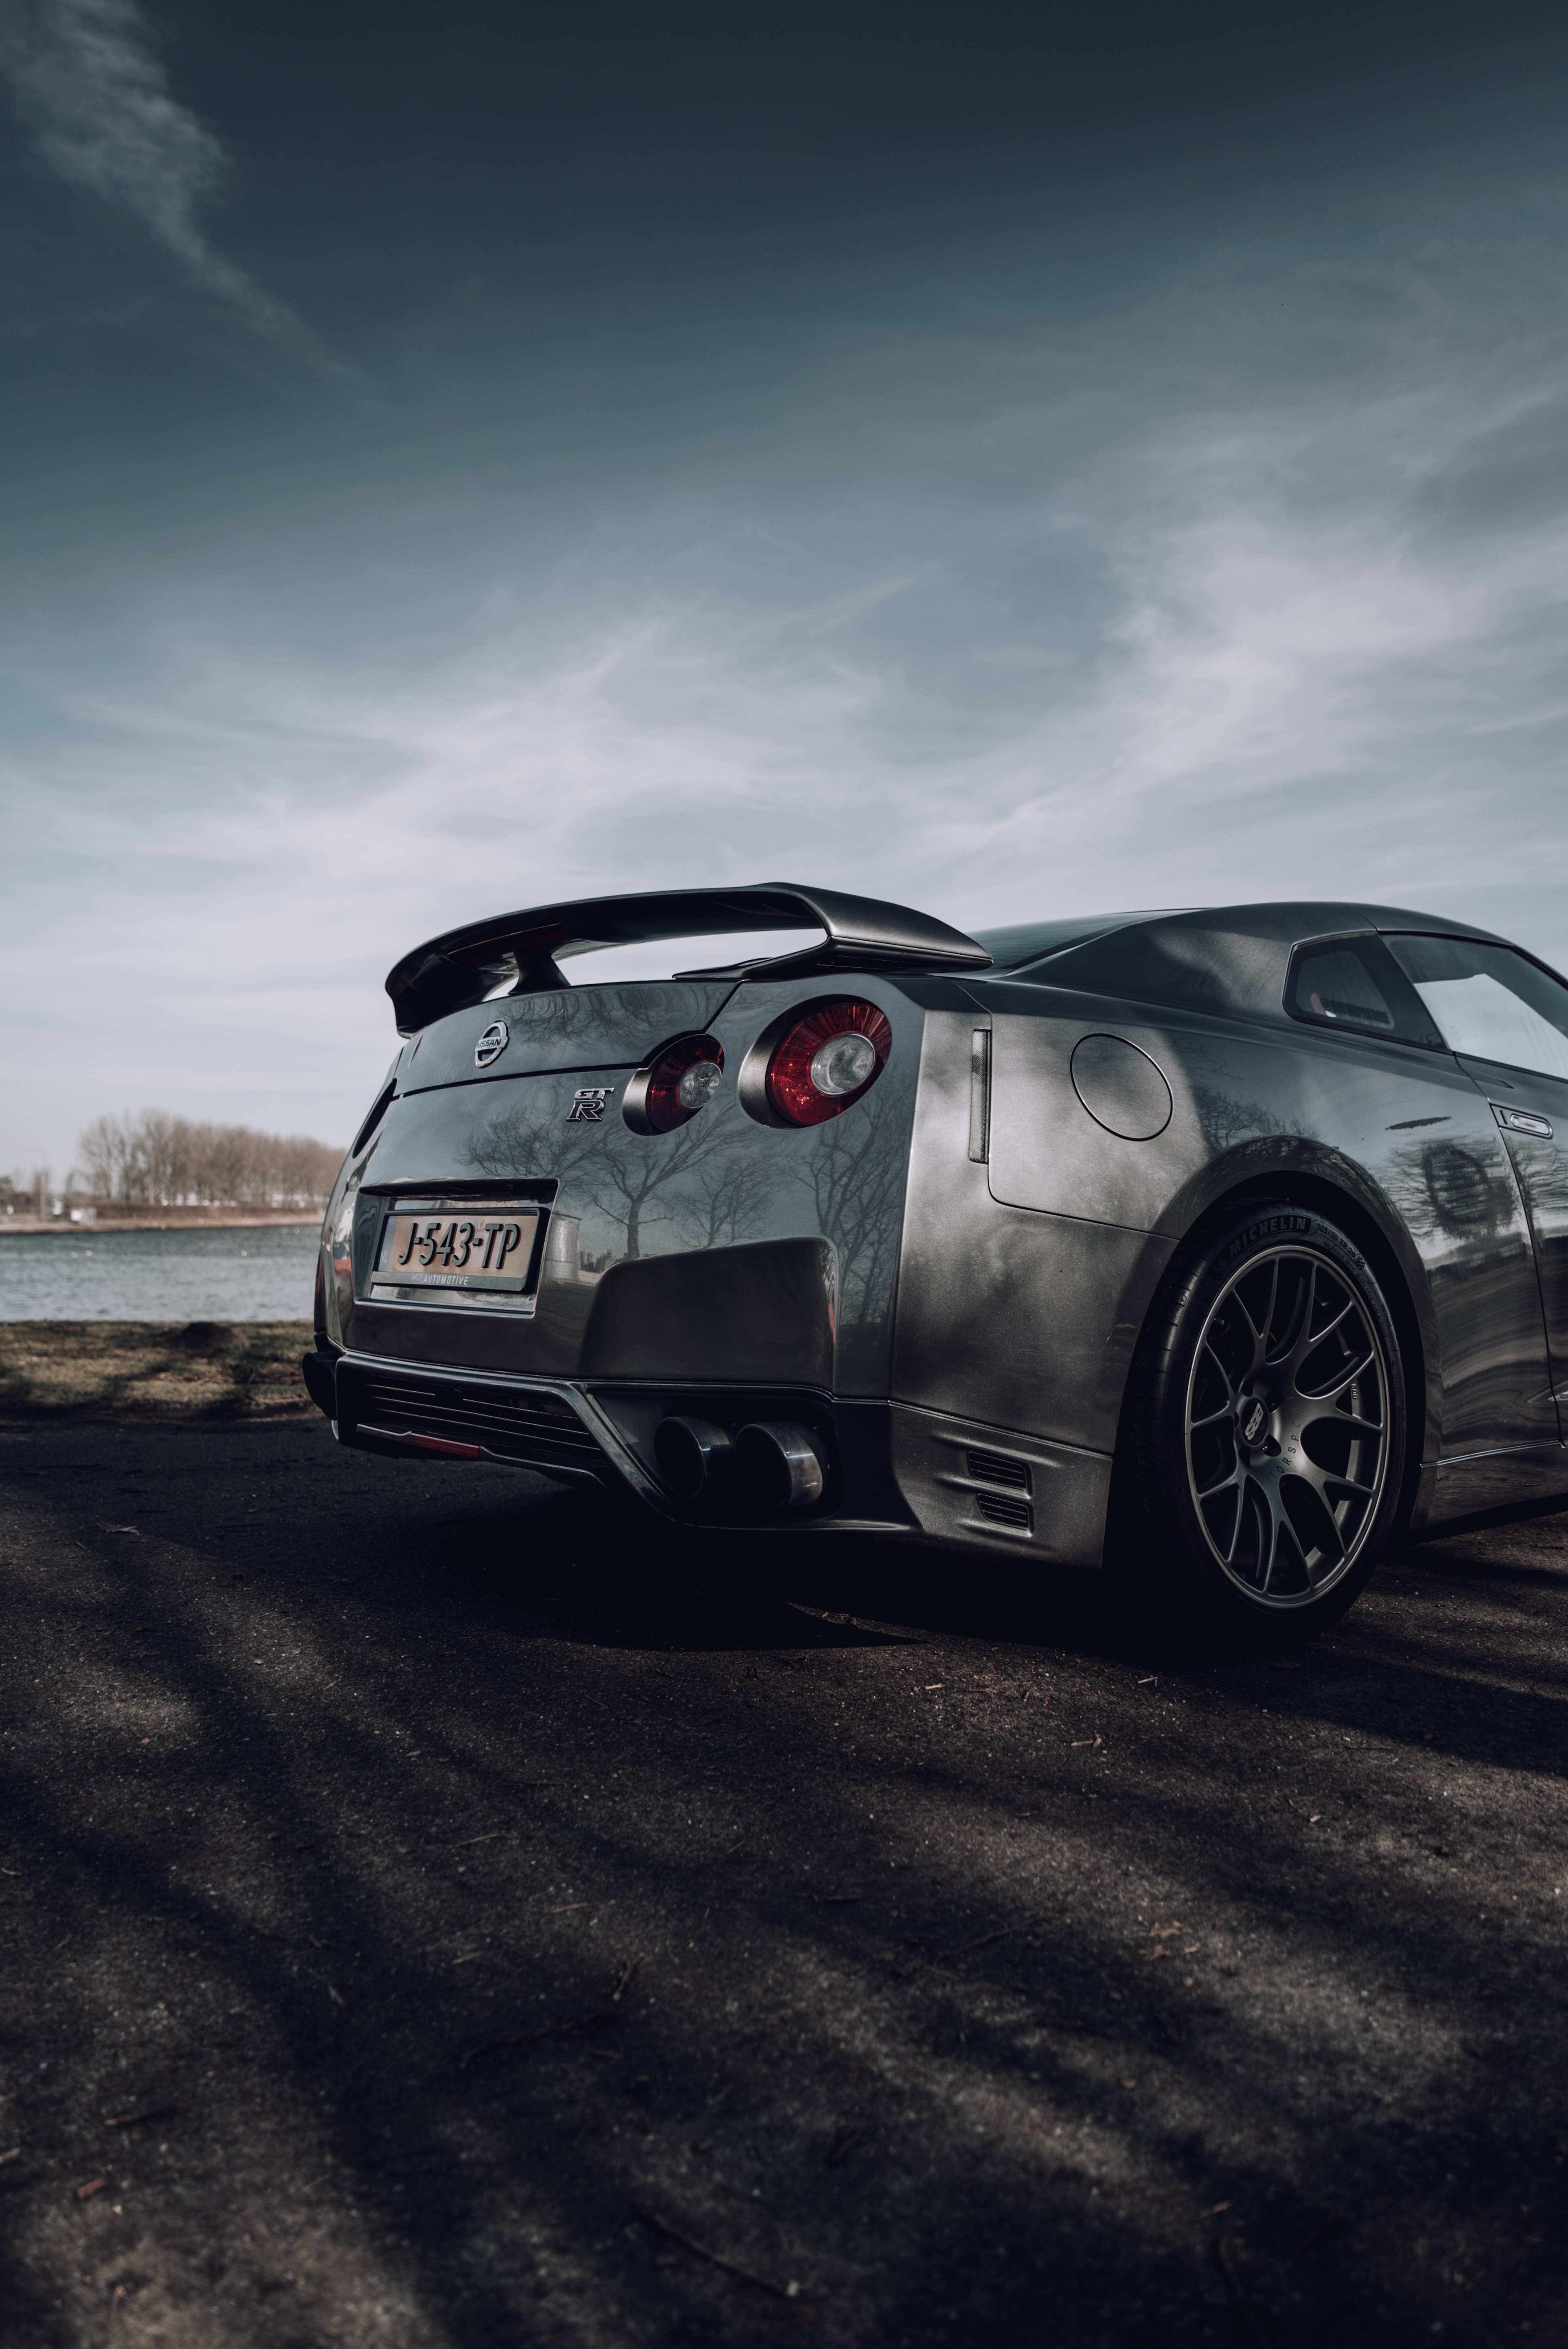 nissan, cars, road, car, side view, silver, nissan gt r